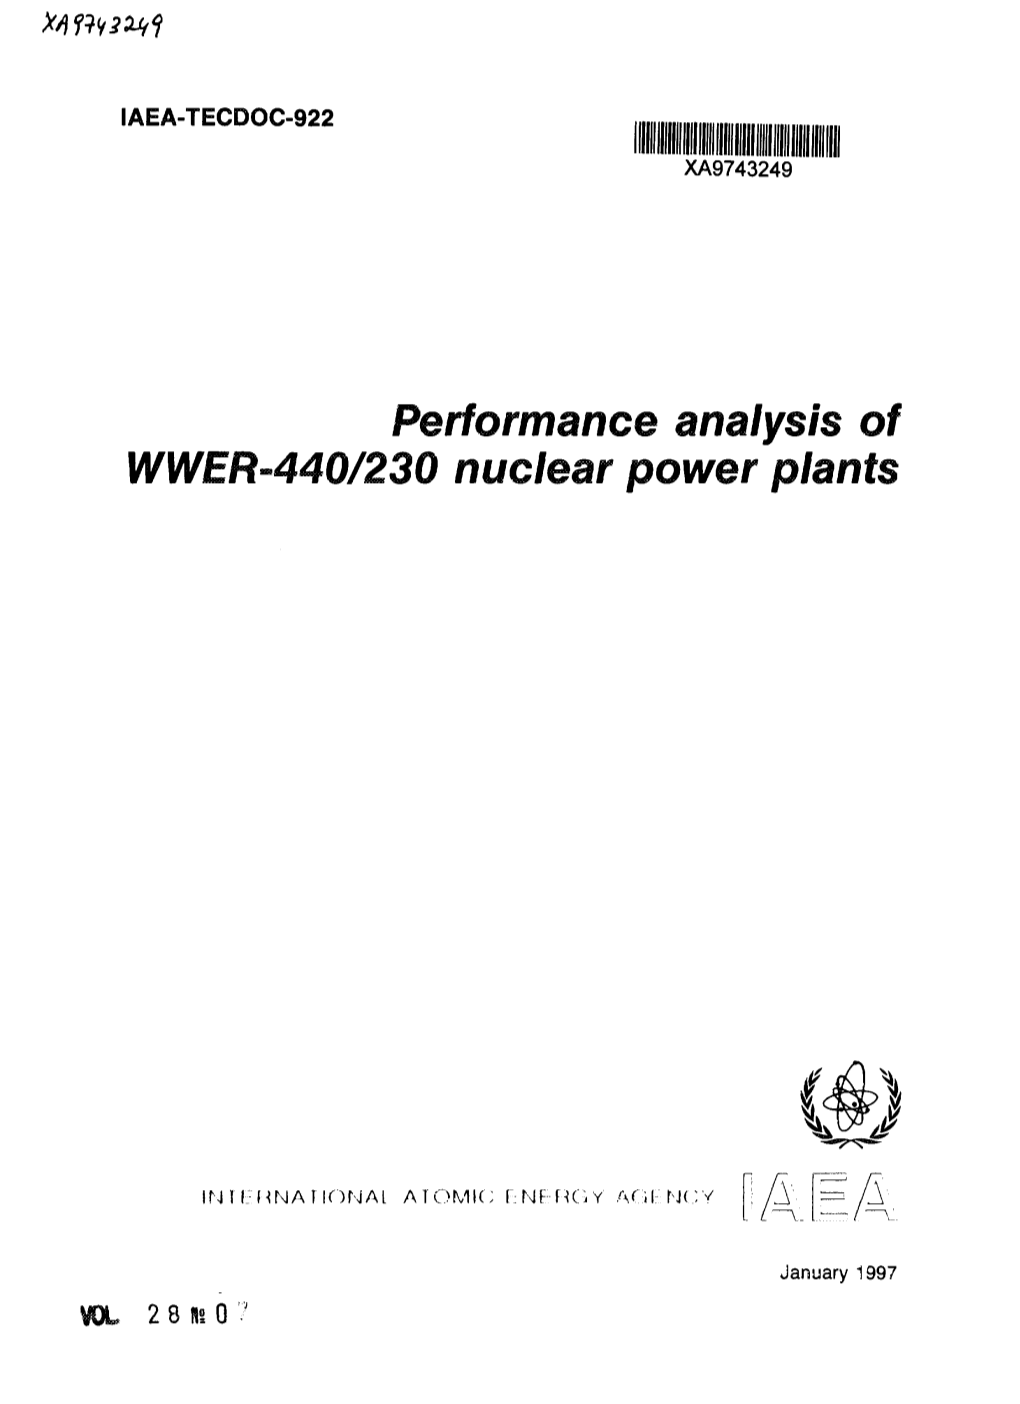 Performance Analysis of WWER-440/230 Nuclear Power Plants